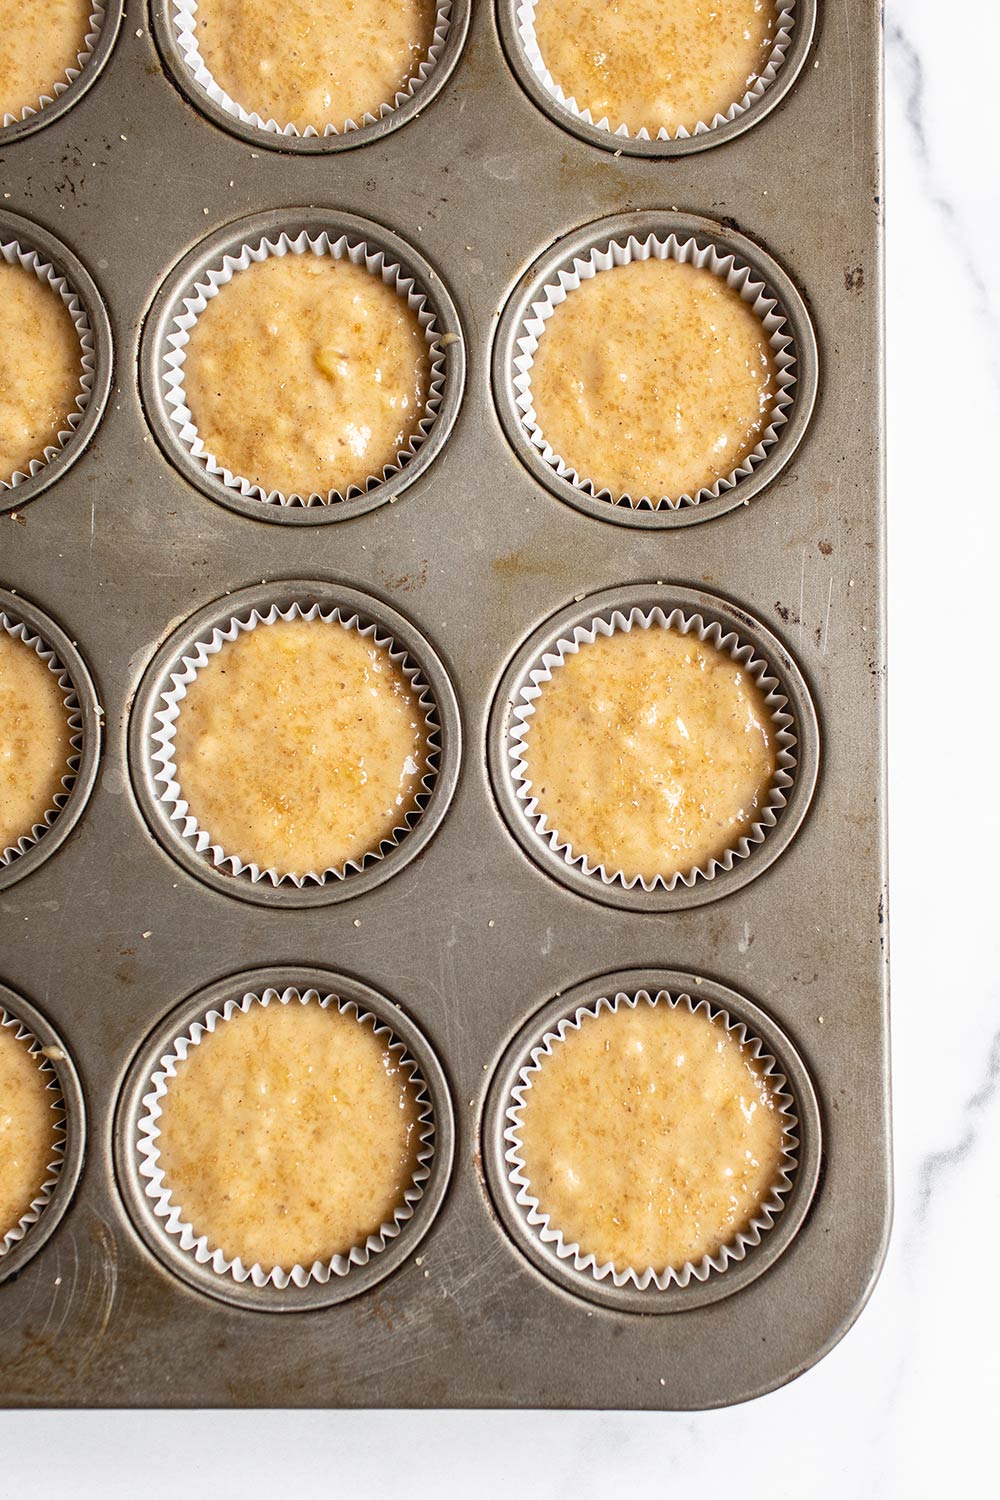 banana muffin batter divided into muffin tin cavities with liners, ready to bake